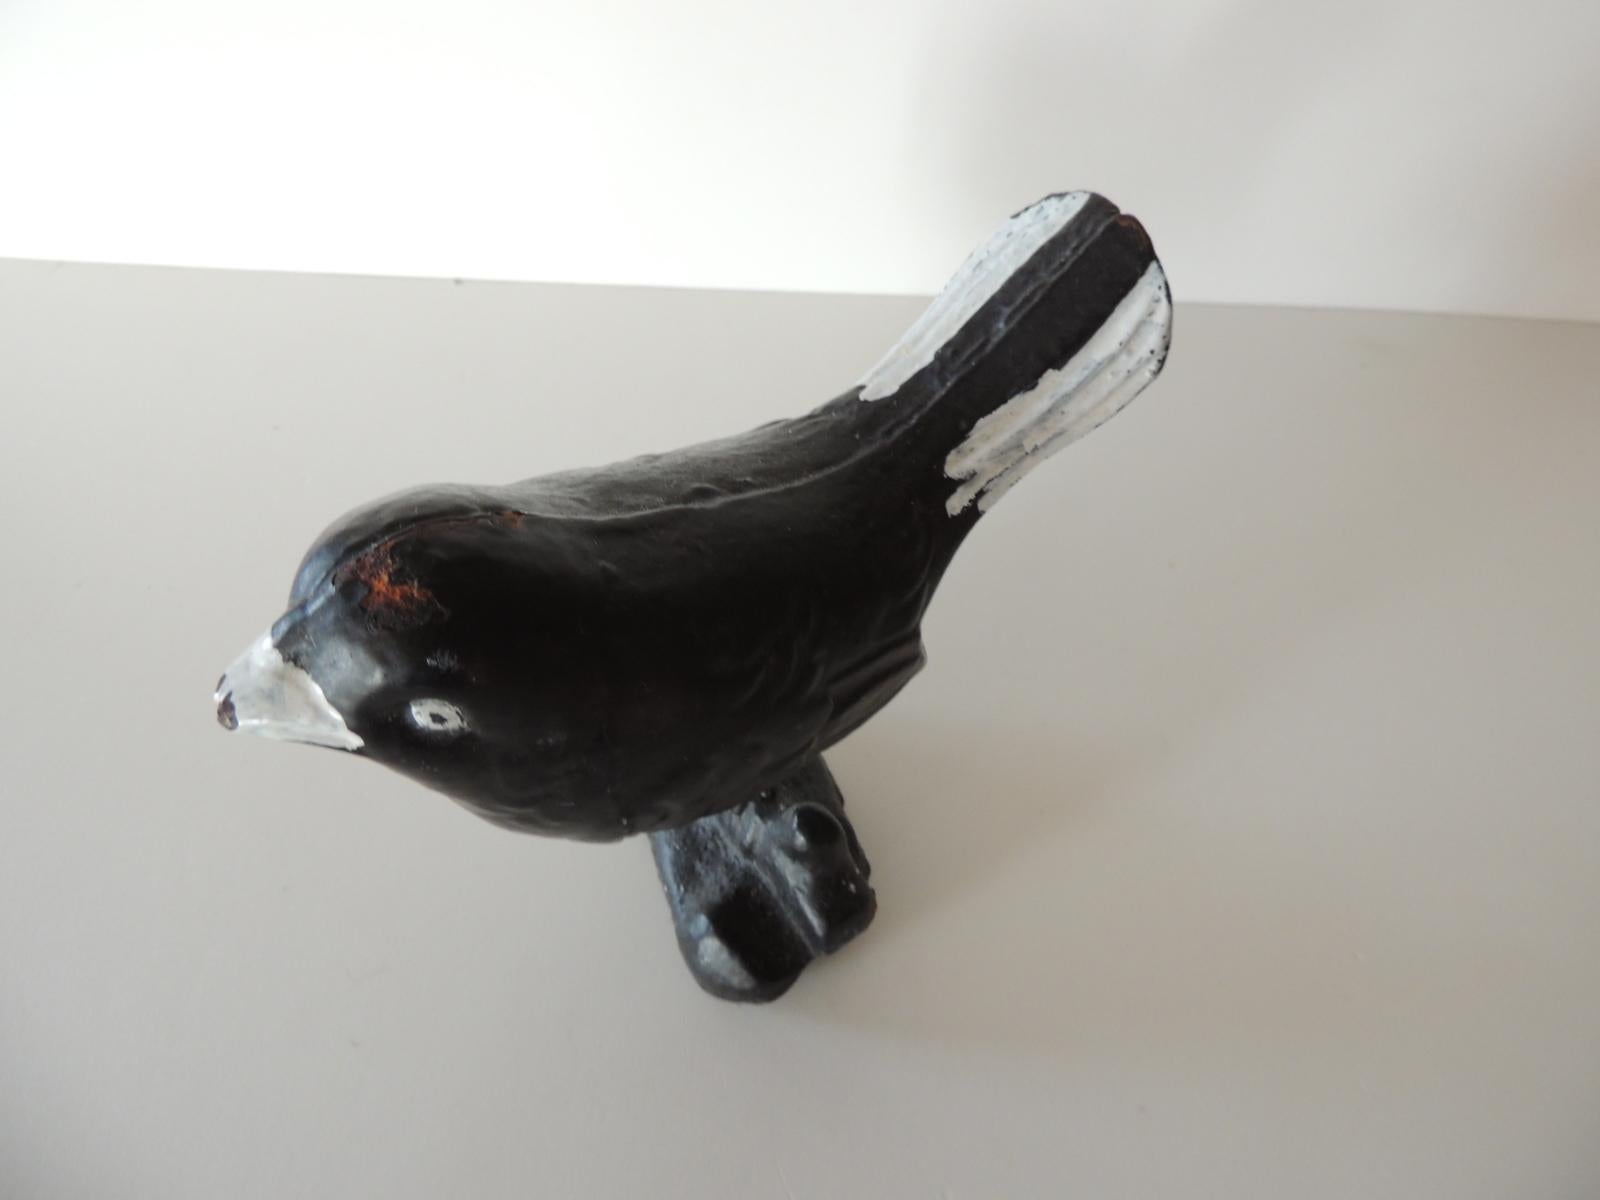 Black and white painted iron bird door stopper.
Size: 4